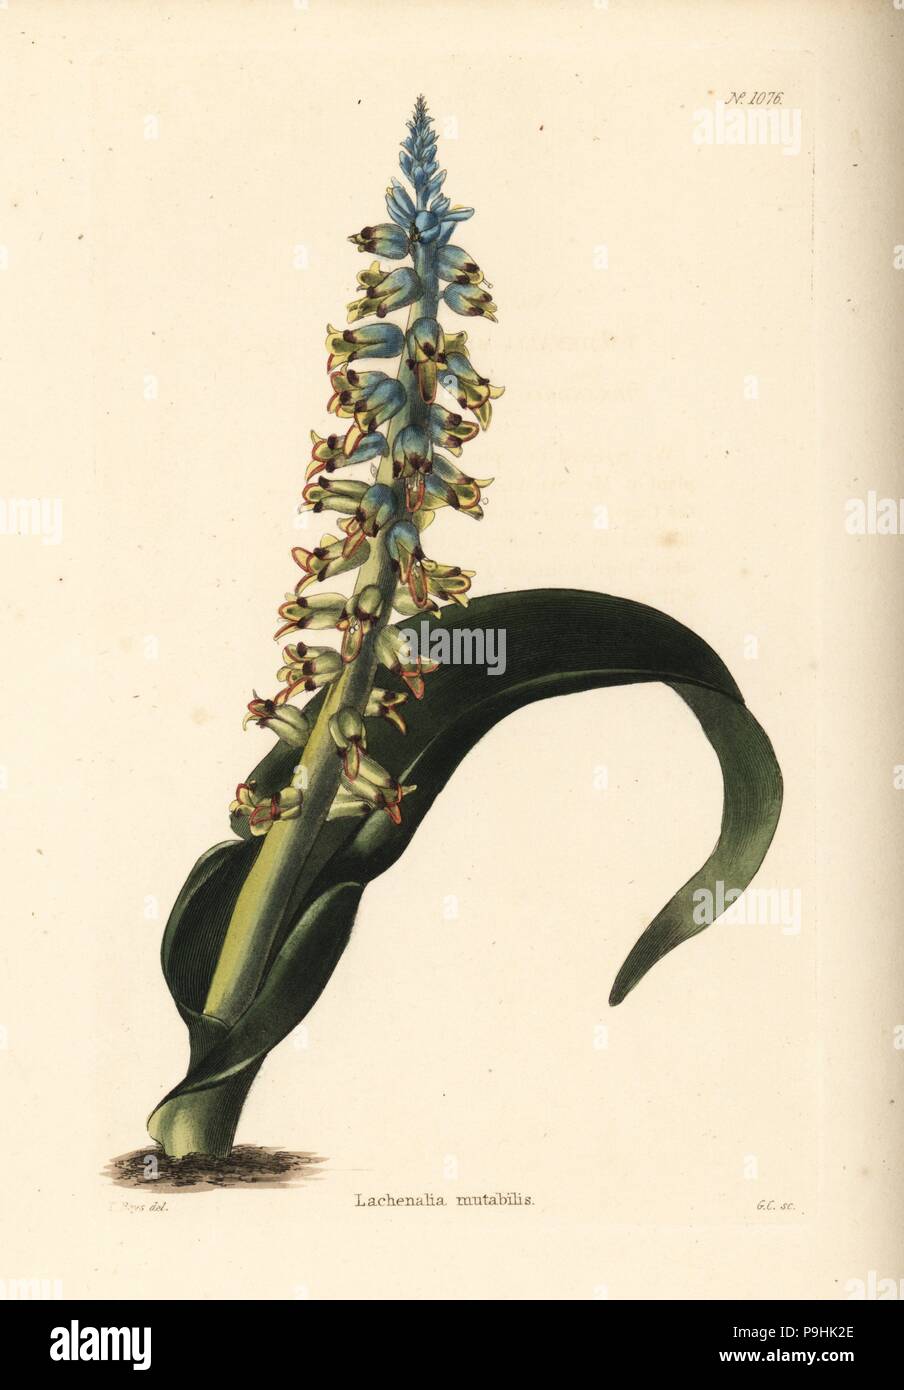 Lachenalia mutabilis. Handcoloured copperplate engraving by George Cooke after Thomas Shotter Boys from Conrad Loddiges' Botanical Cabinet, Hackney, 1825. Stock Photo